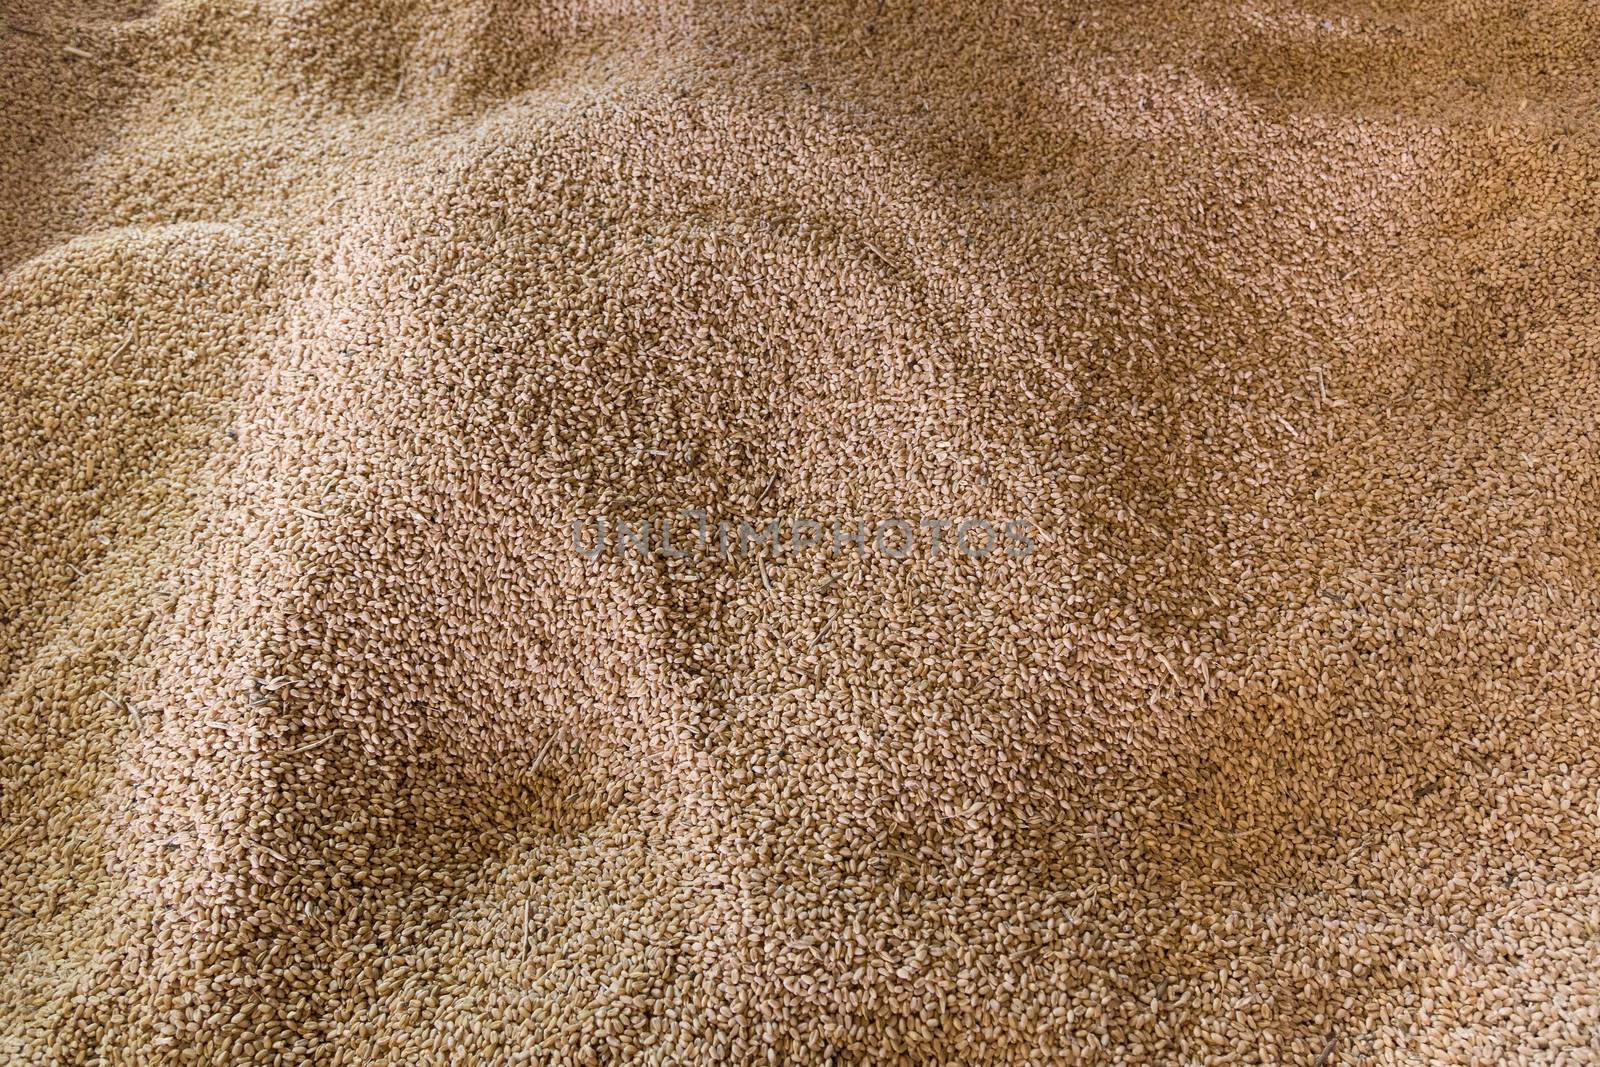 A pile of grain grains in the warehouse by sandra_fotodesign